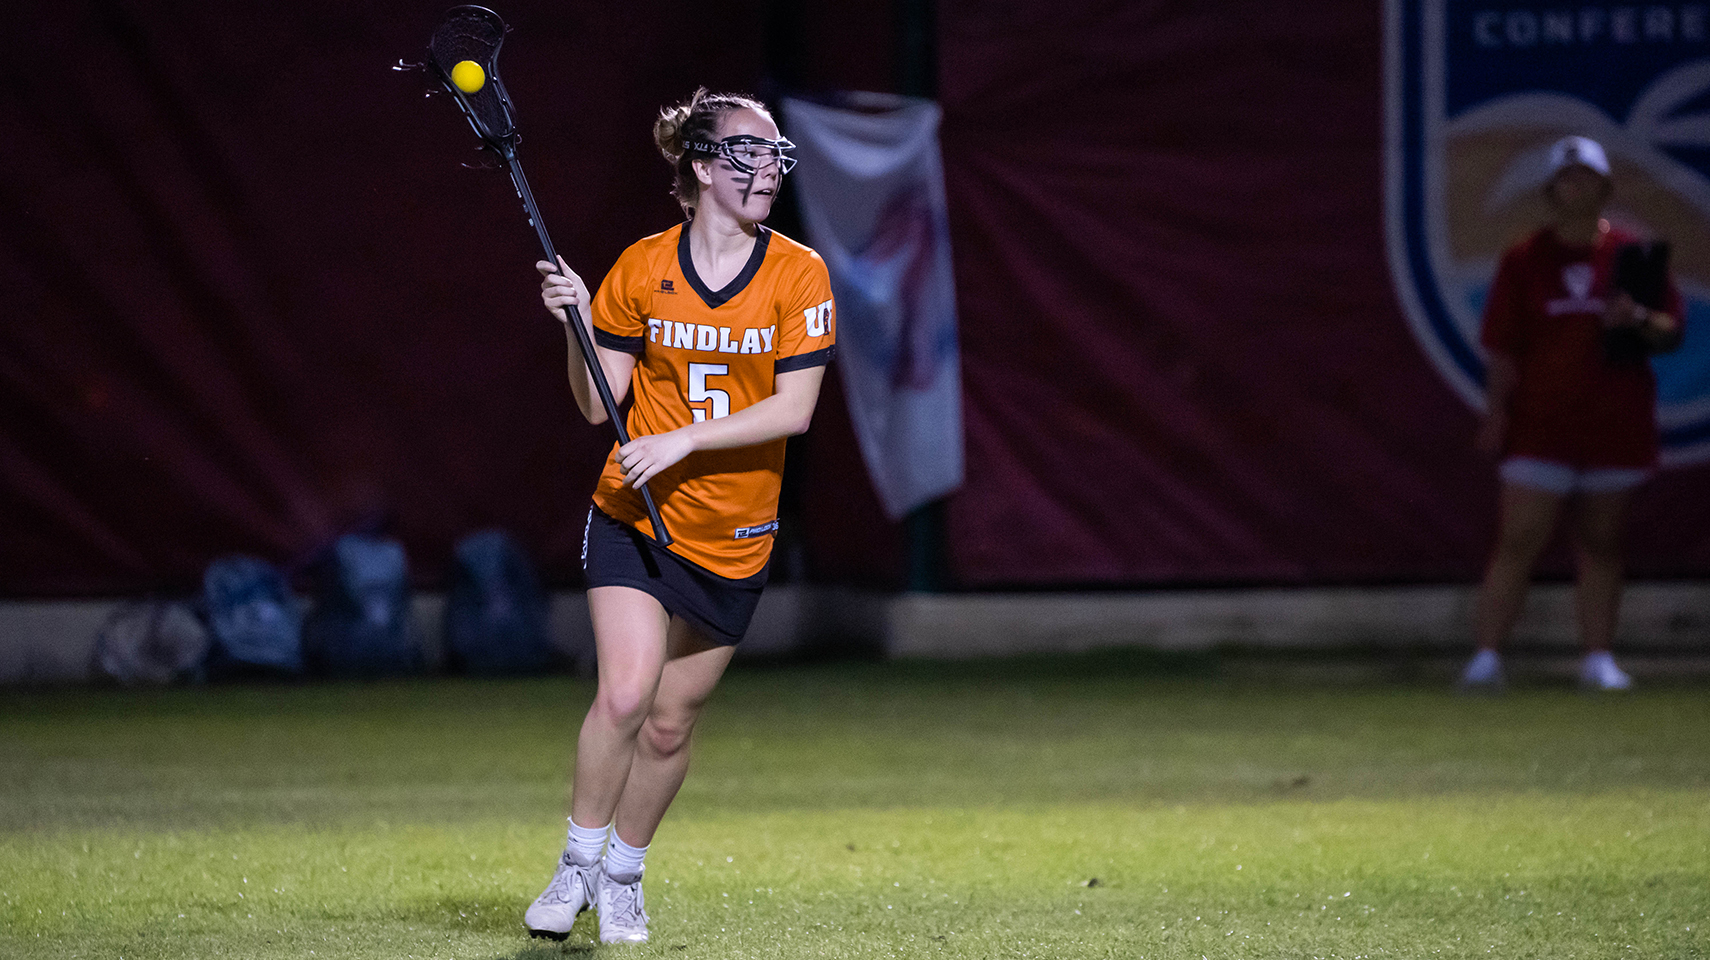 Women's lacrosse player holding the ball at night